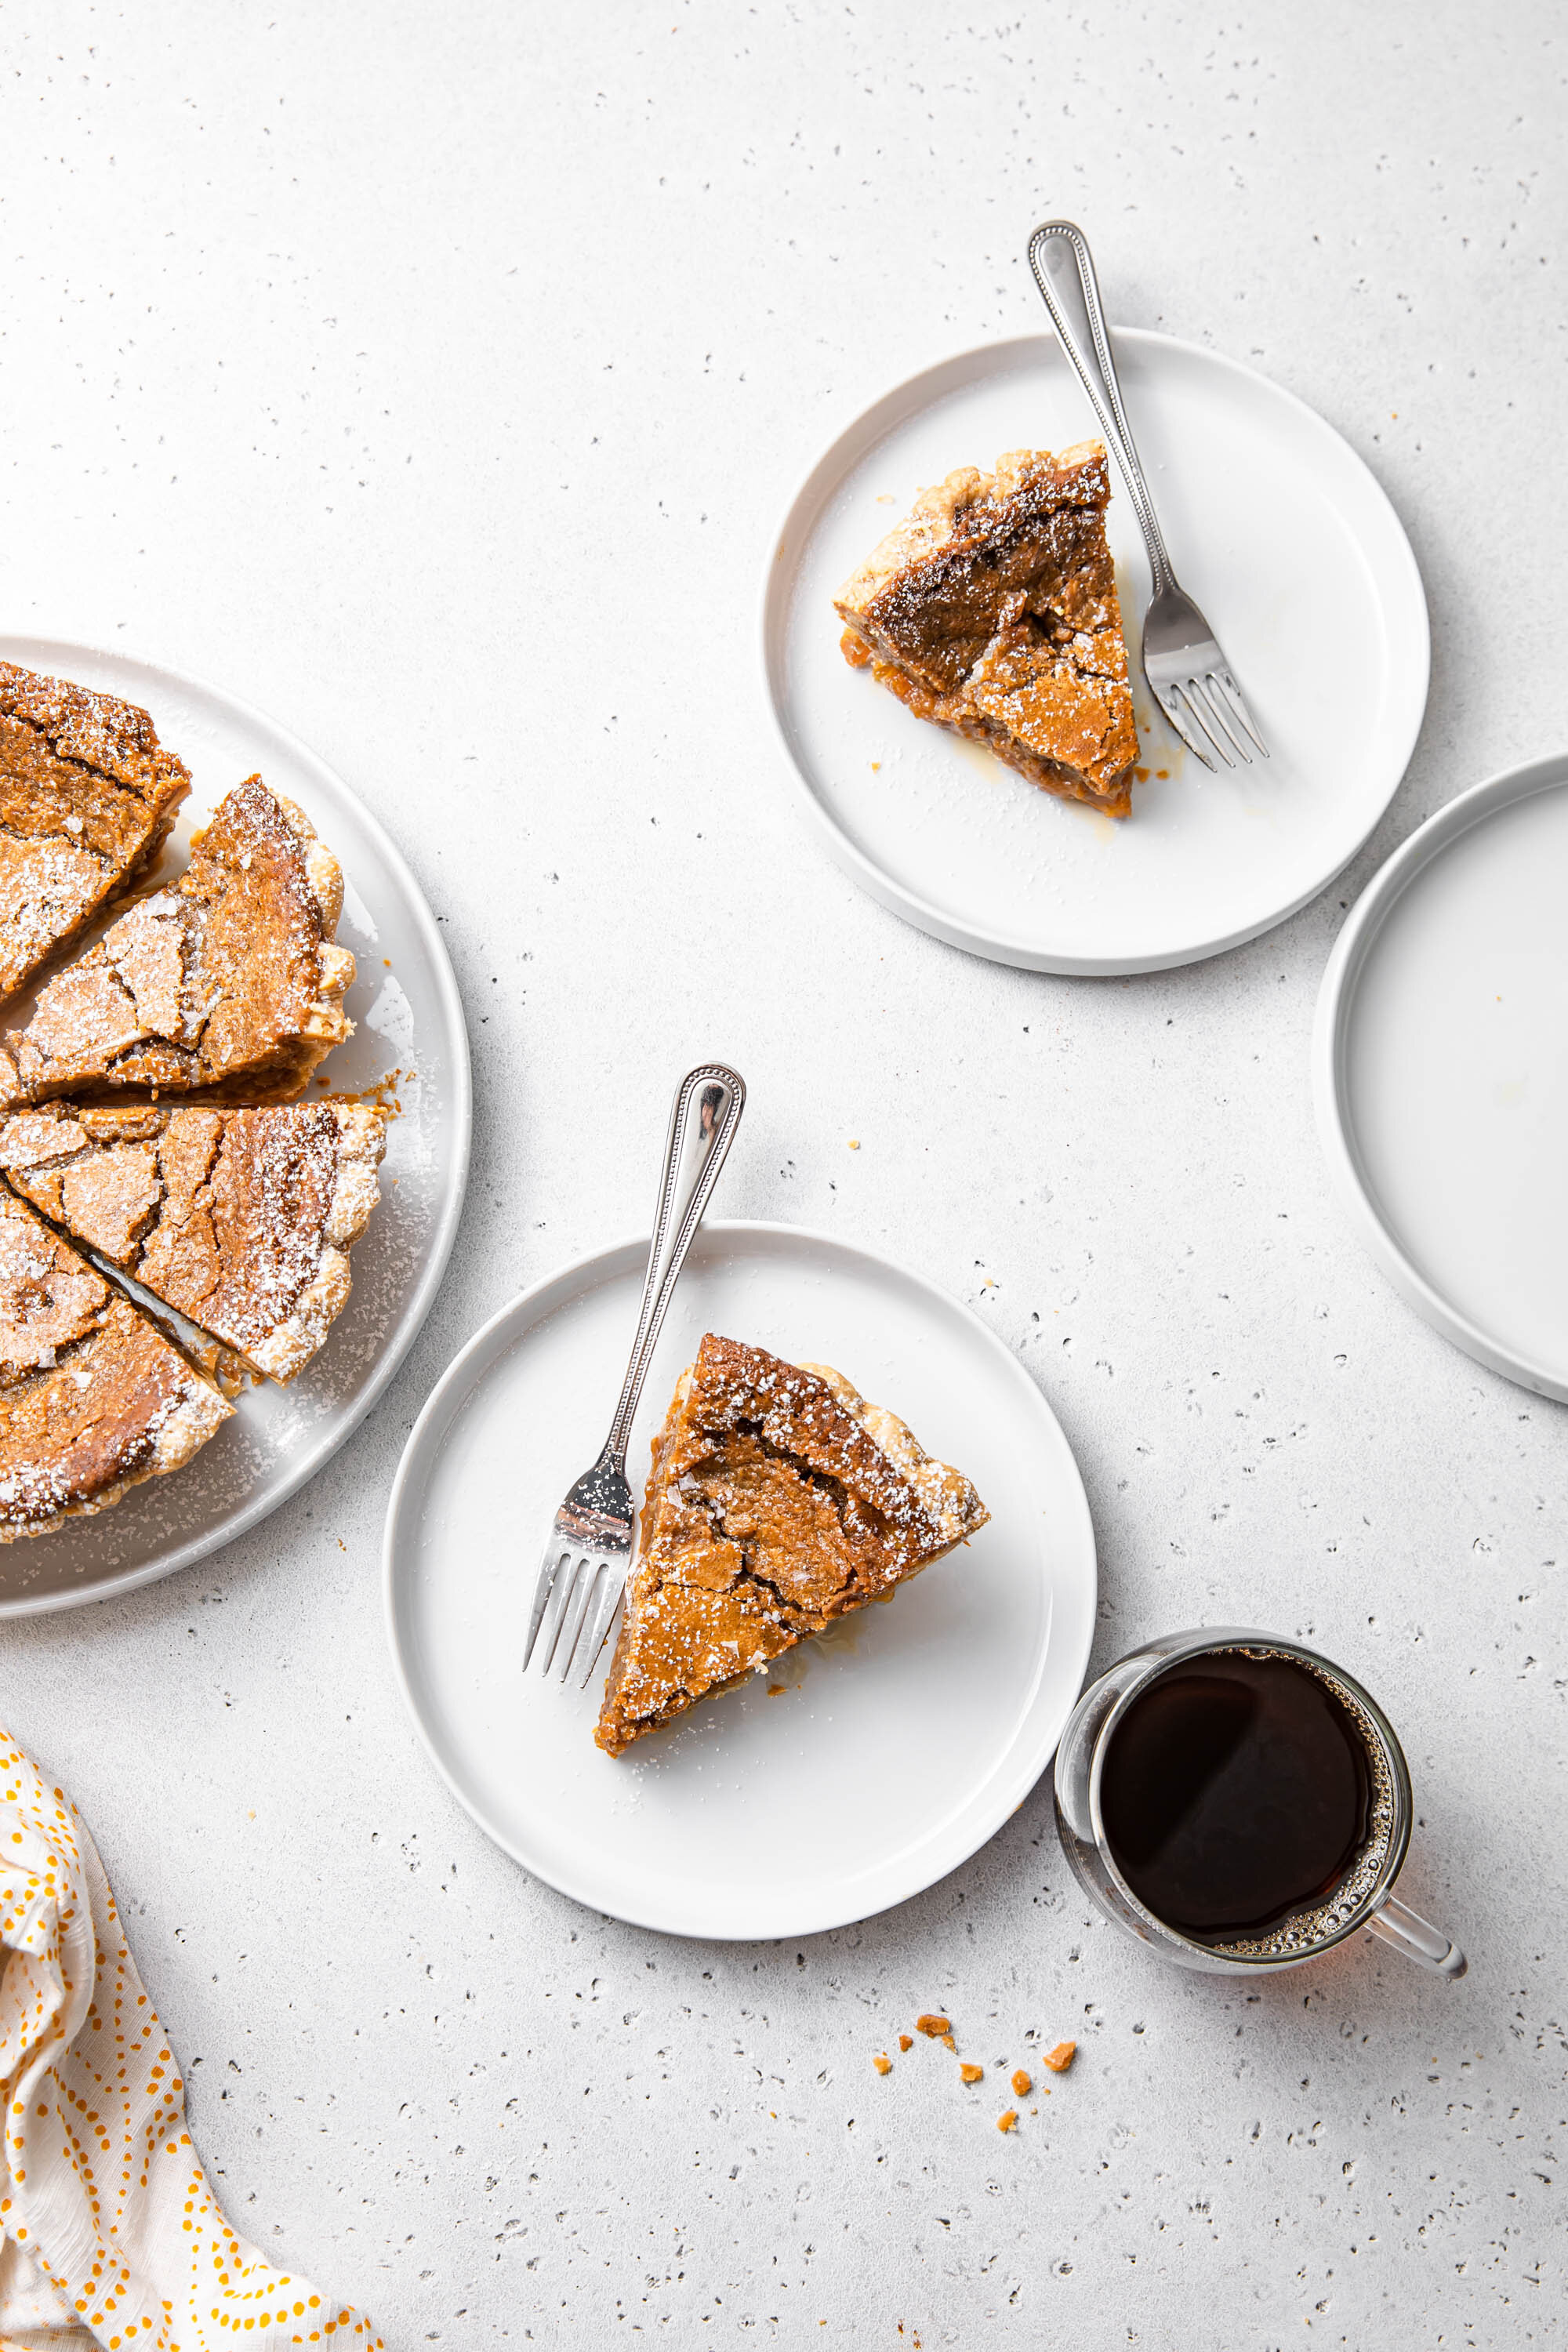 Slices of French Canadian Maple Sugar Pie with powdered sugar on top and a side of coffee.